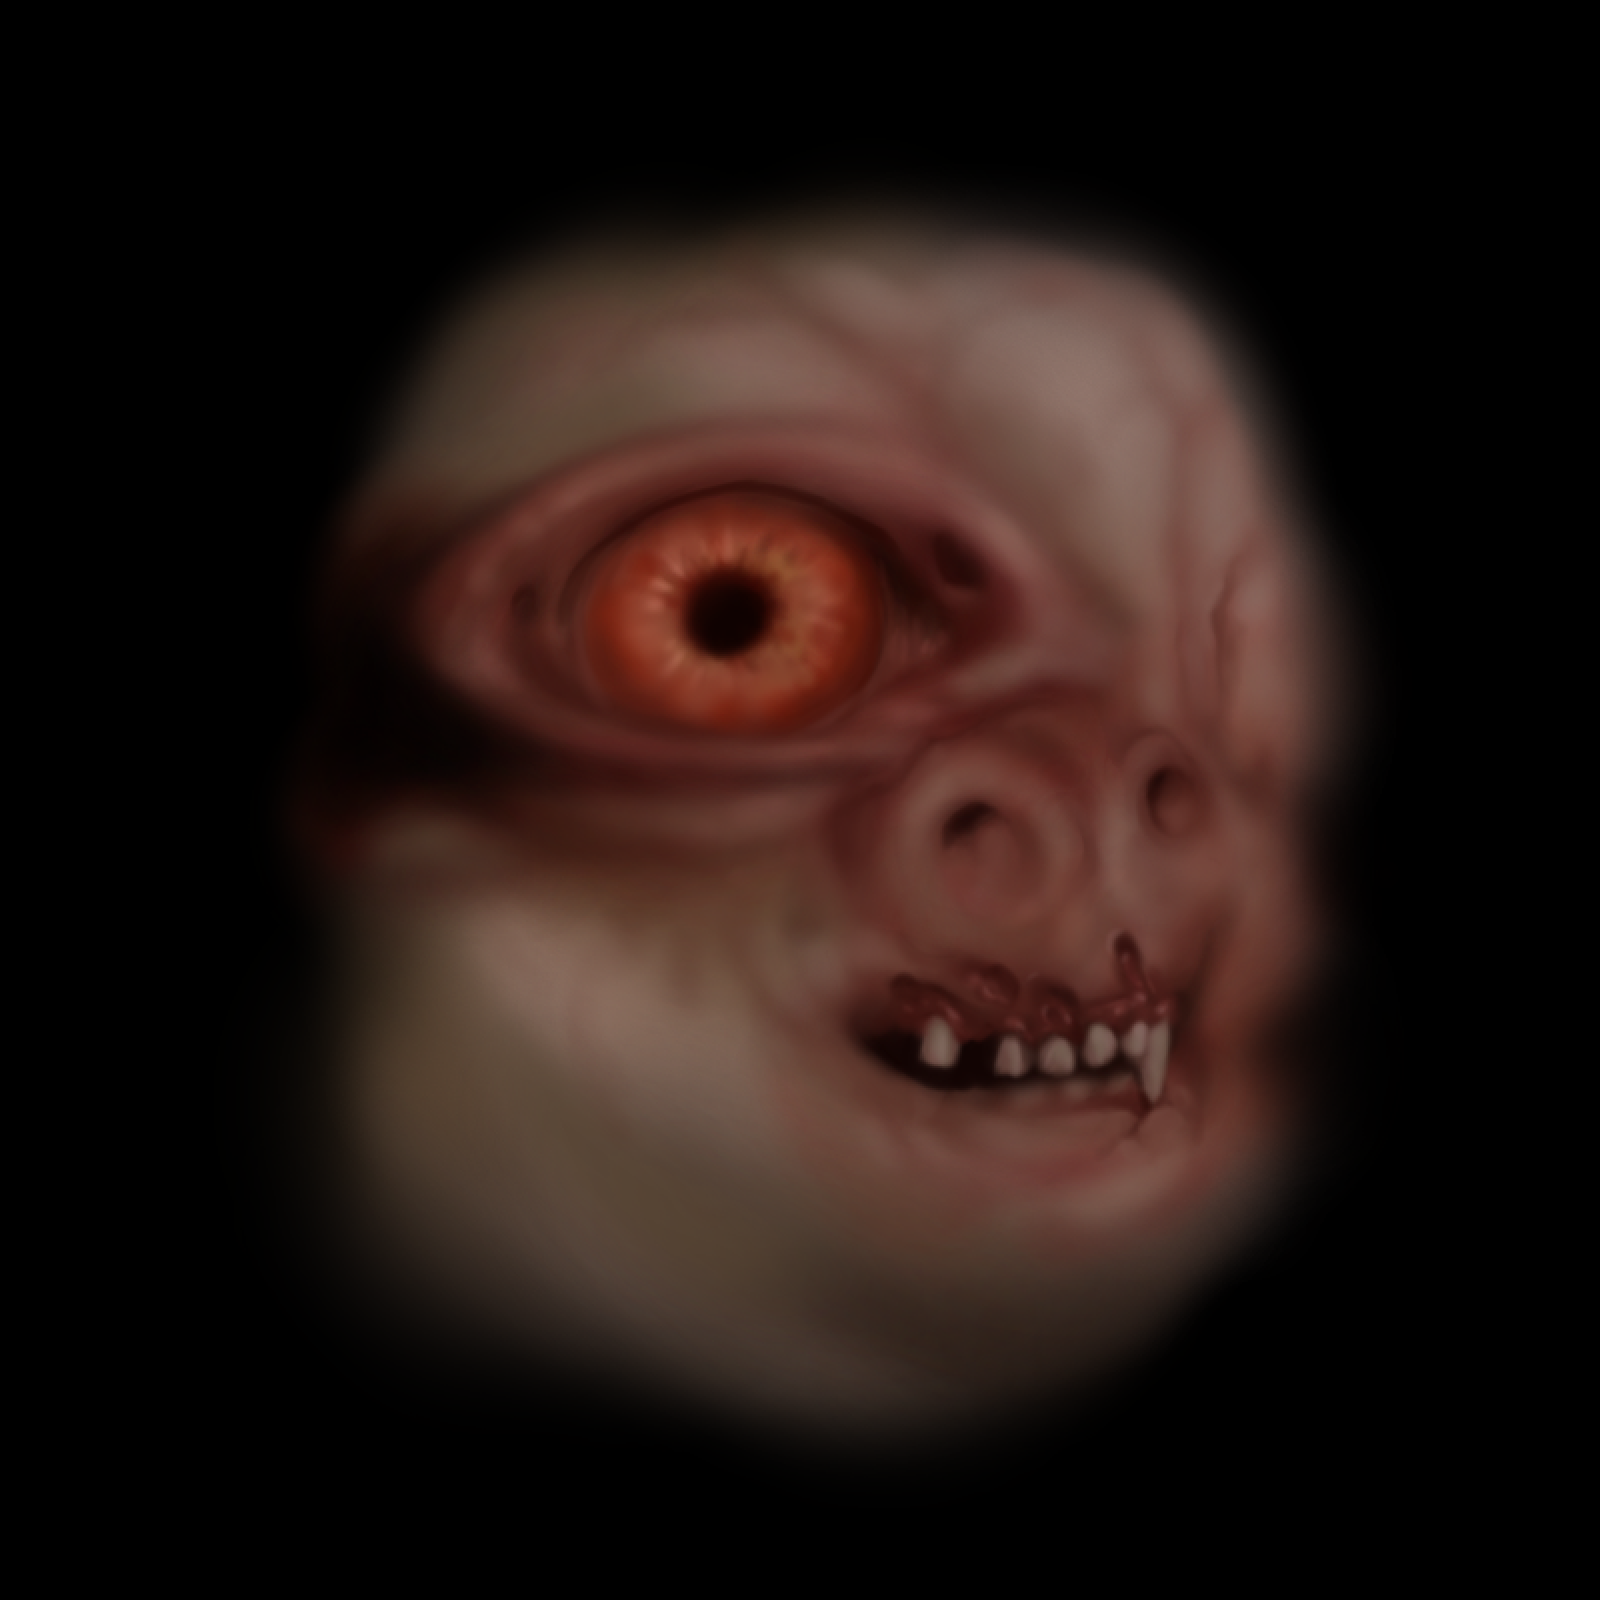 Digital painting on a dark background with a blurry face in the middle. The face has a menacing or silly smile and pig-like nose, and an orange eye that looks like the pupil is almost a donut, not part of the eyeball